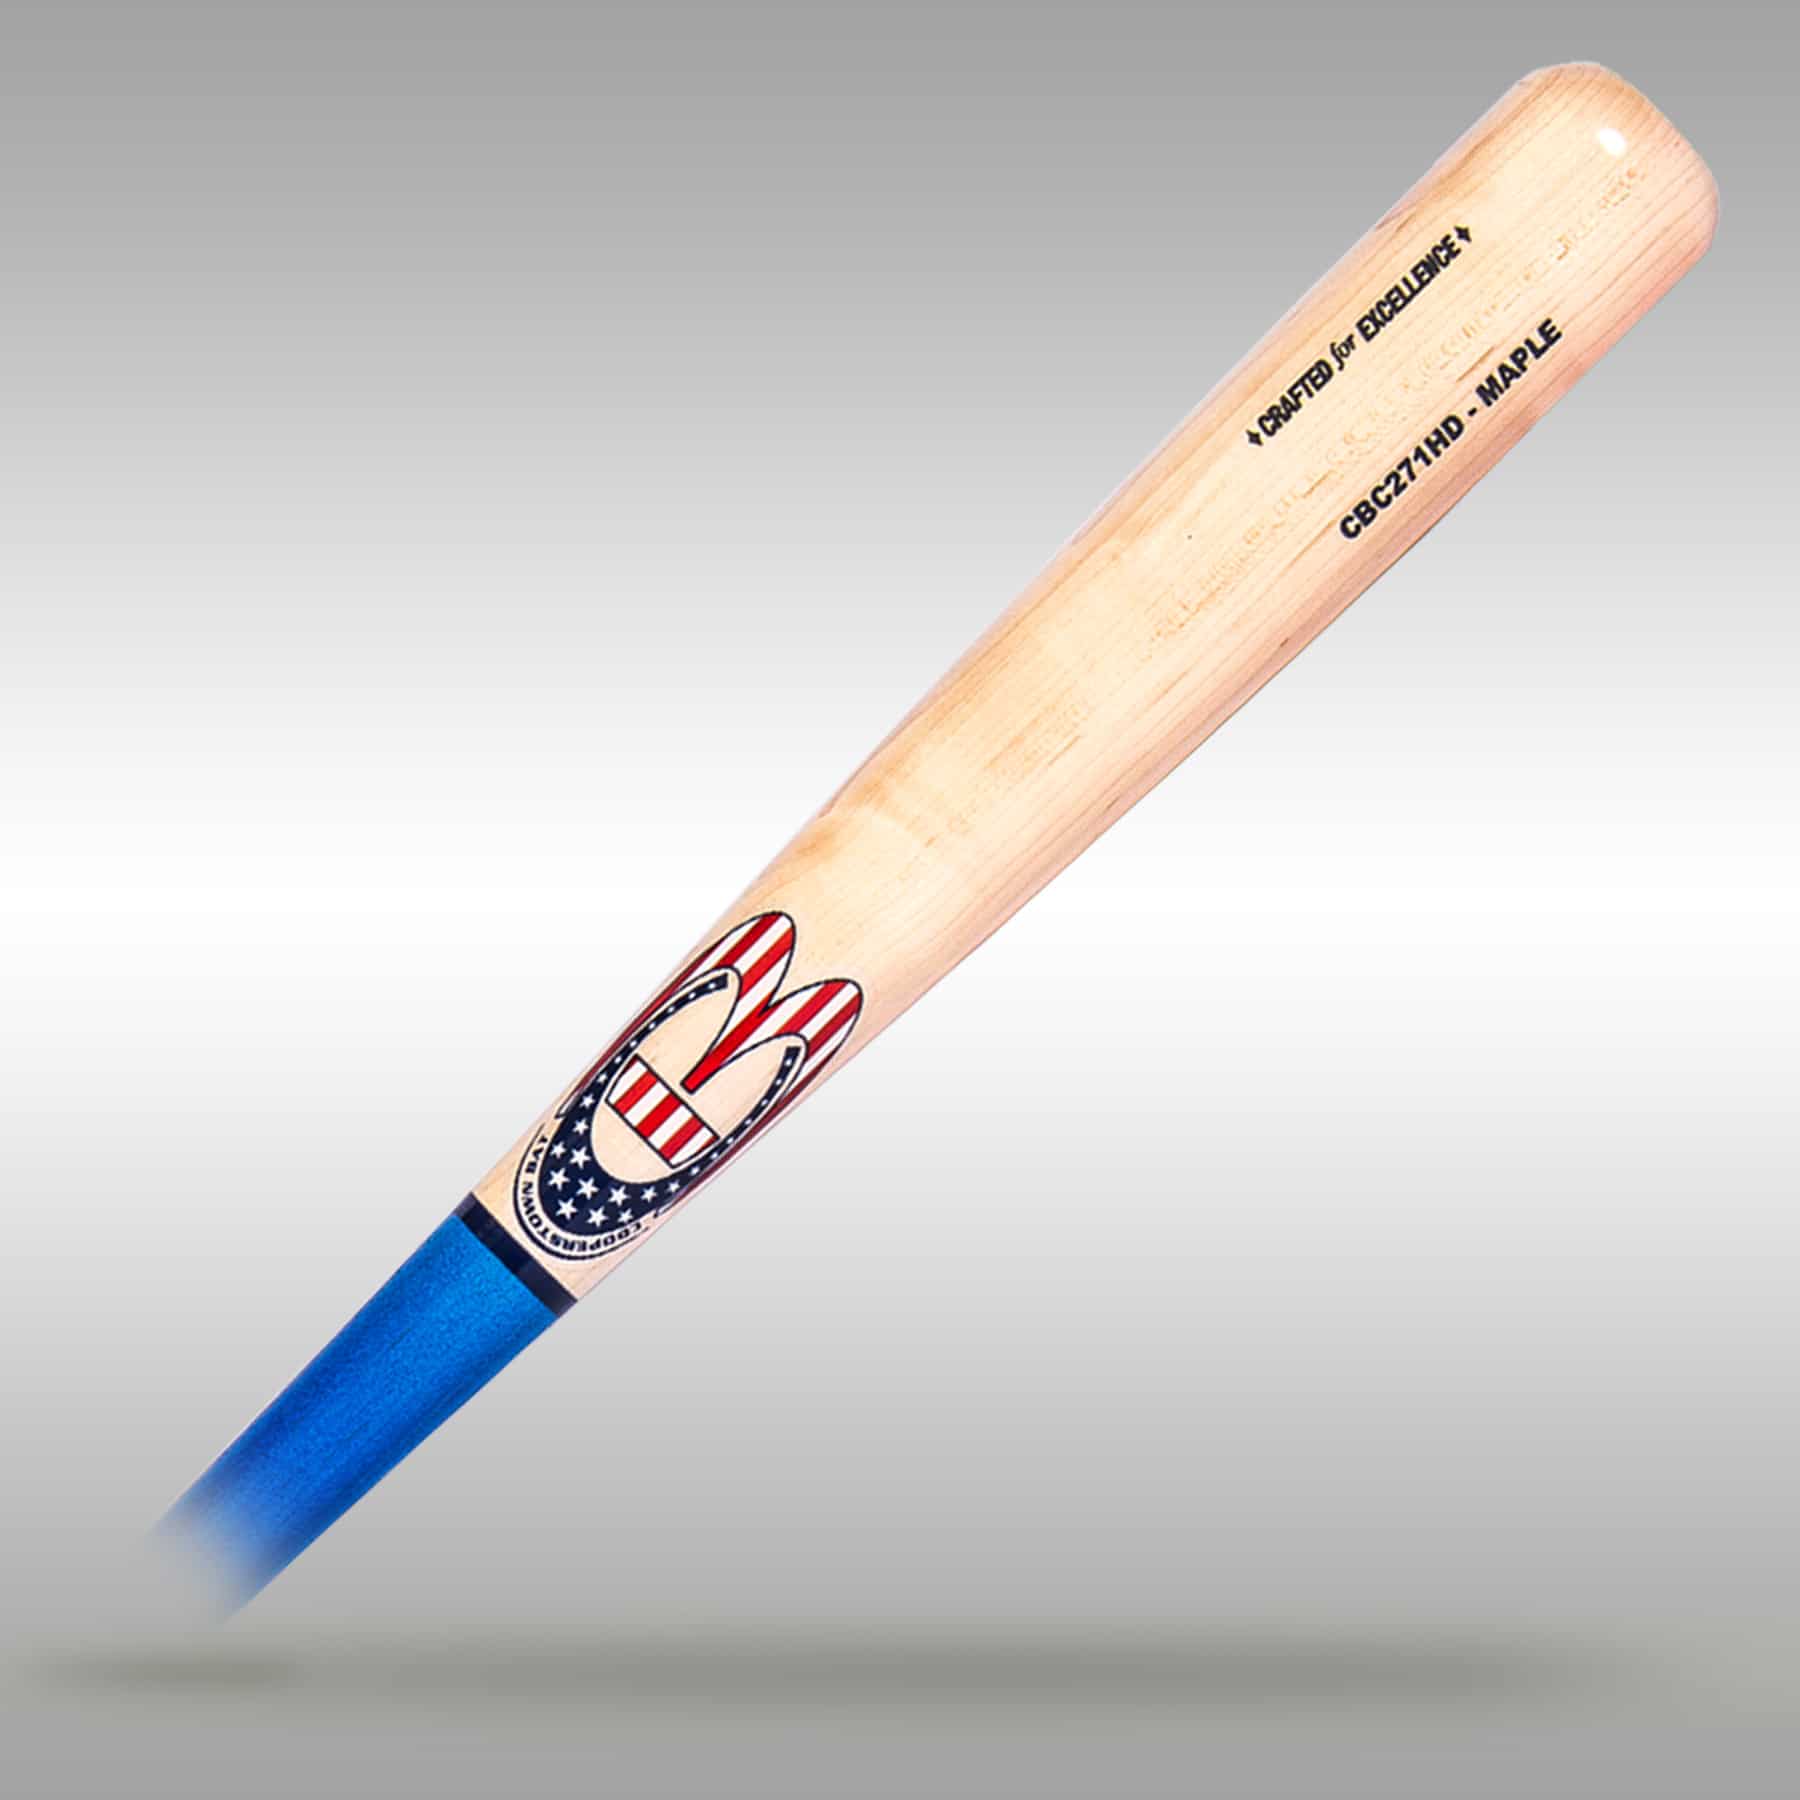 Youth Baseball Bat CBC Falcon 271Y Rock Maple USA Approved 